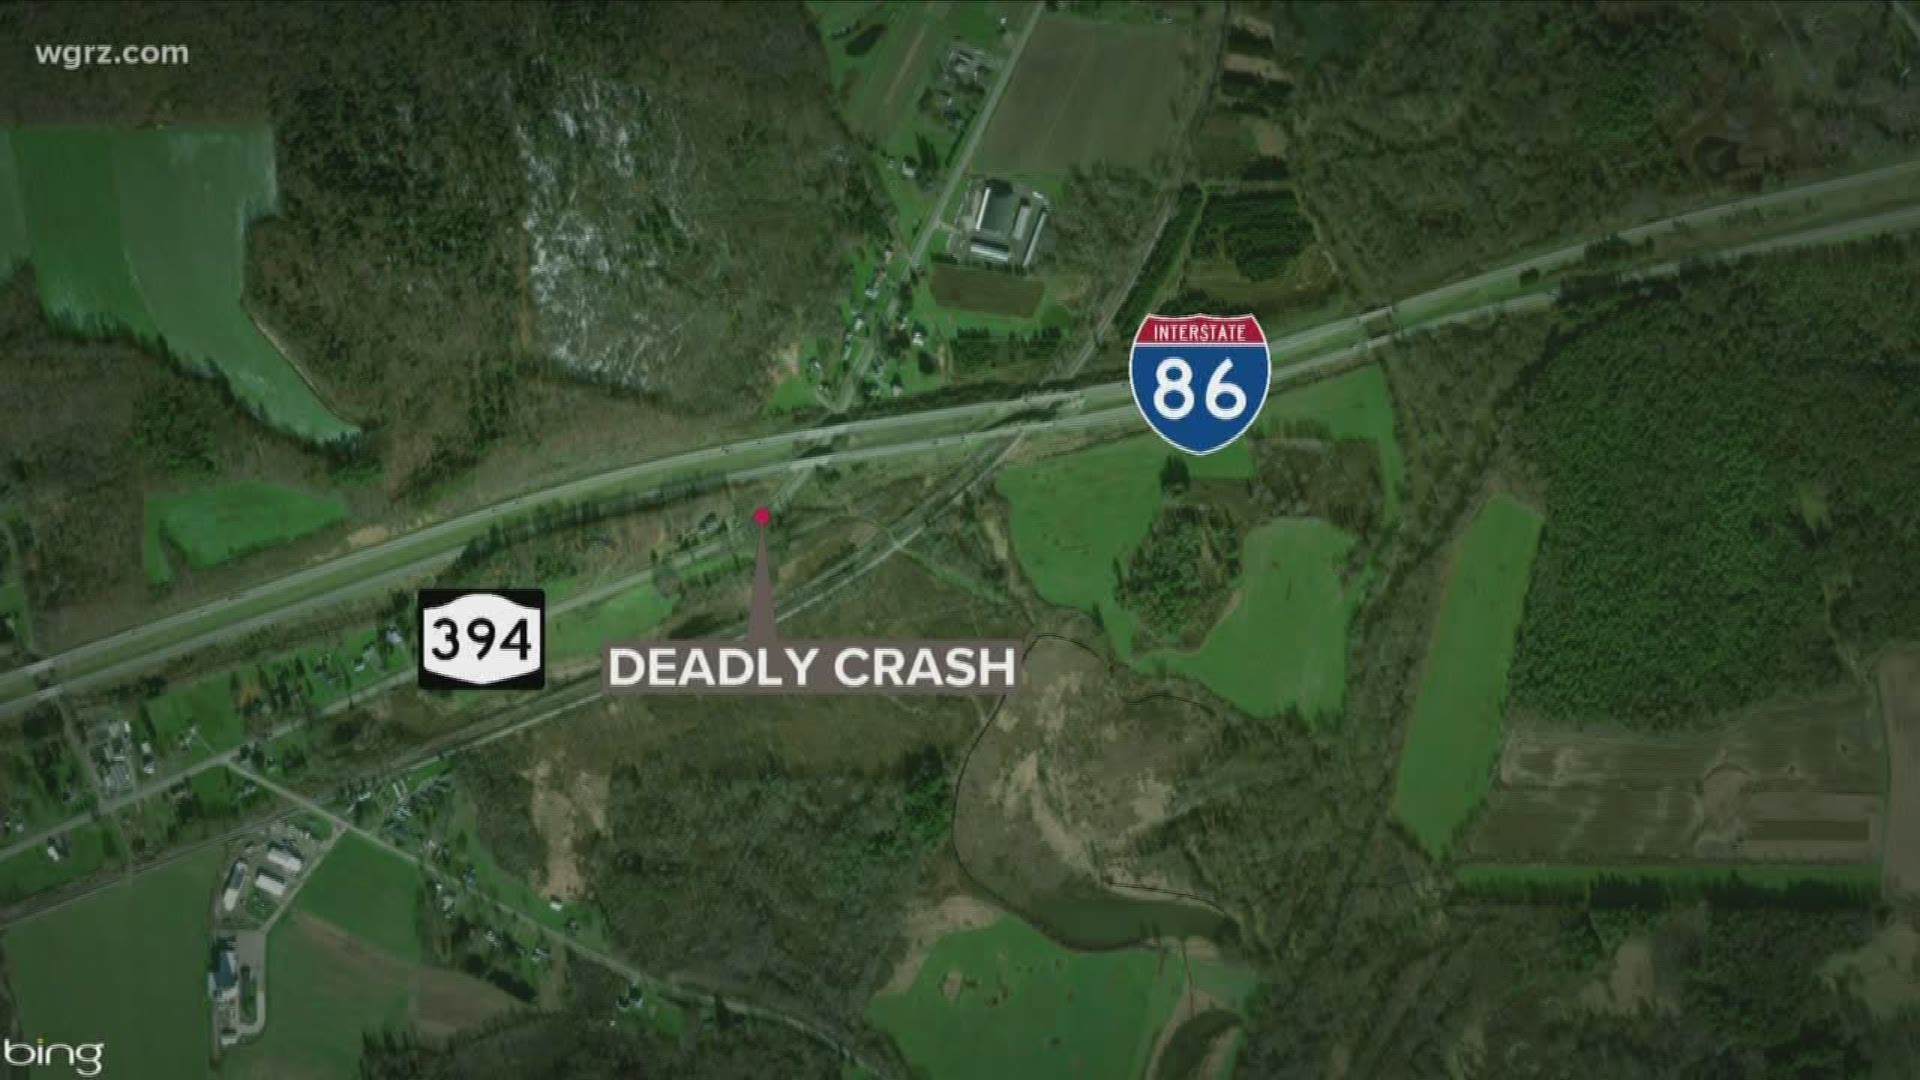 Deputies say 67-year-old Terry Telschow from Jamestown crossed the center line on Route 394 near the I-86 overpass and hit another car head-on.